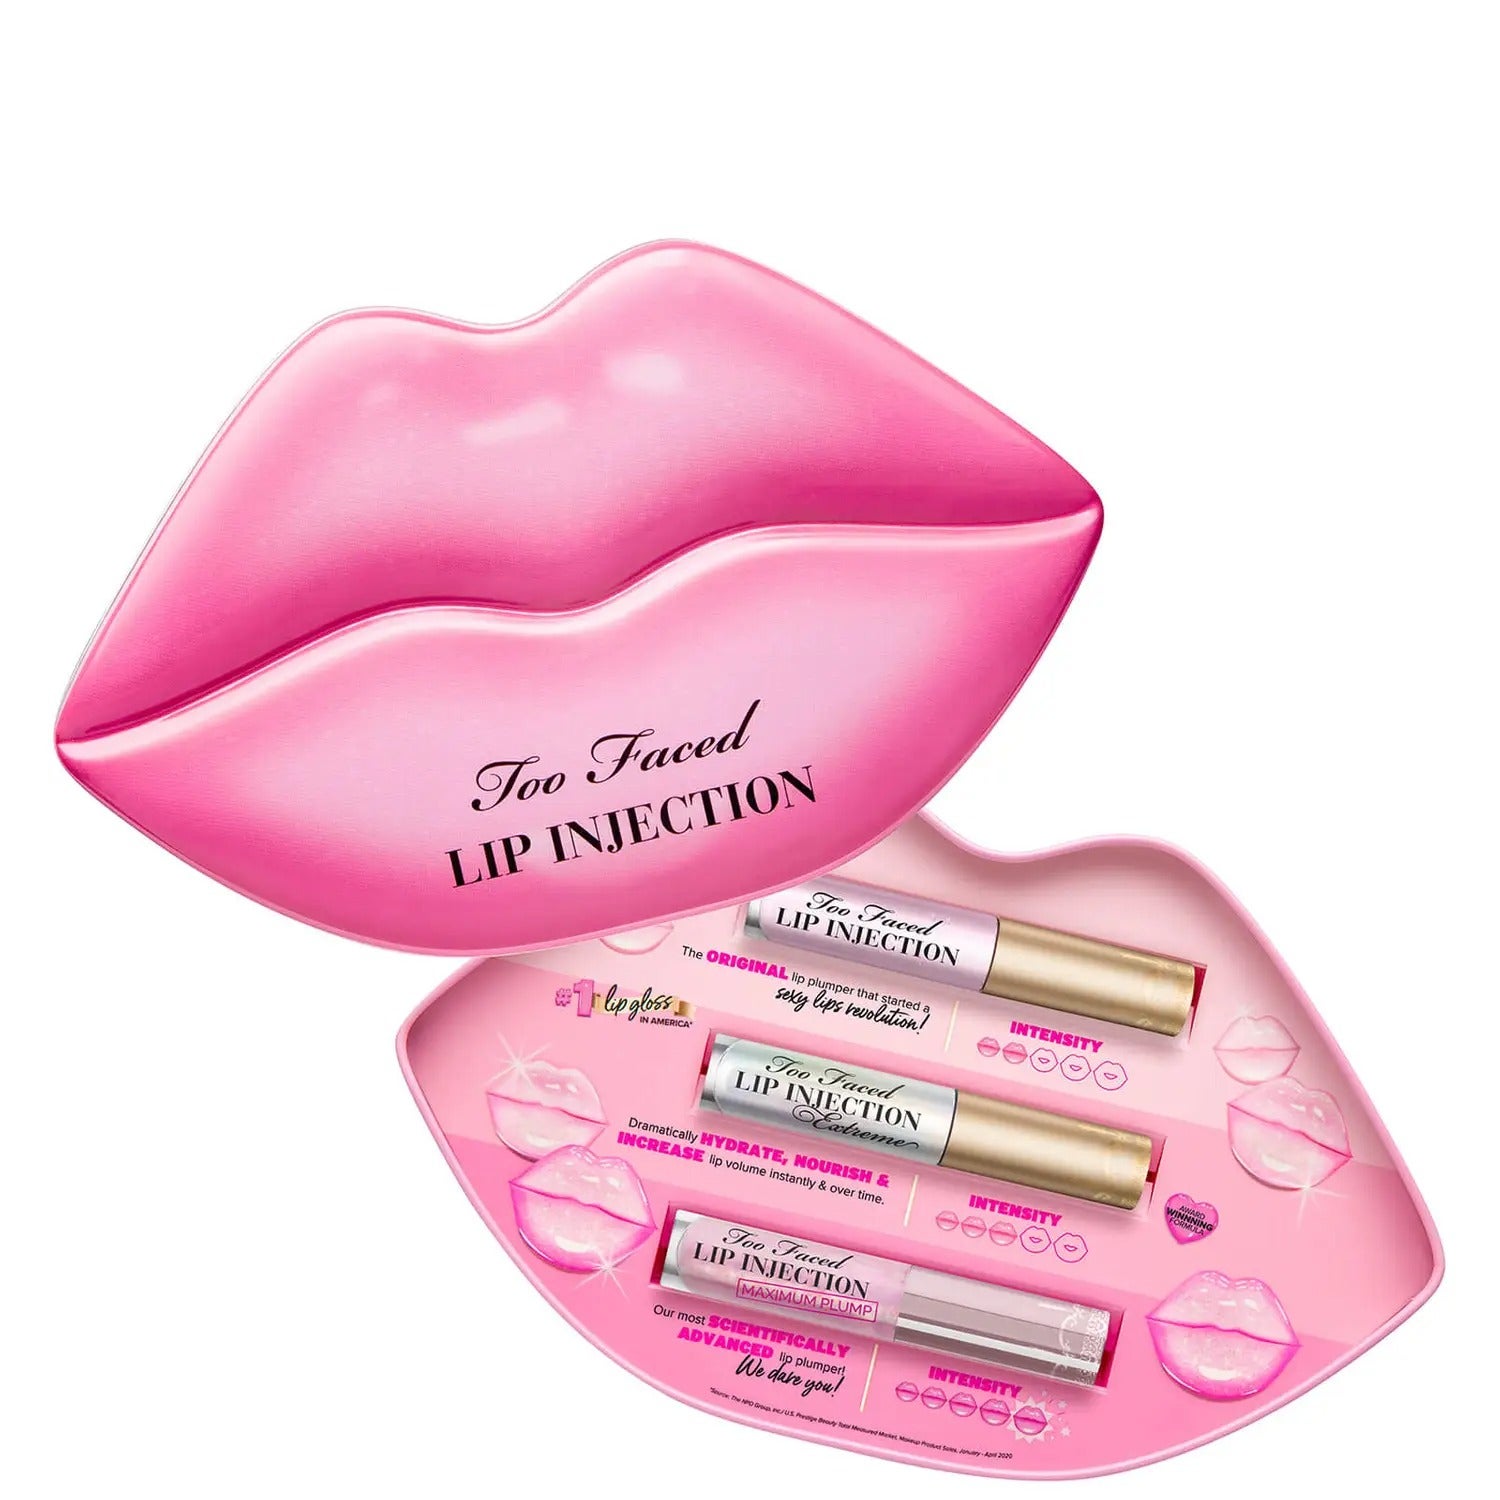 Too Faced + Limited Edition Lip Injection Plump Challenge Lip Plumper Set